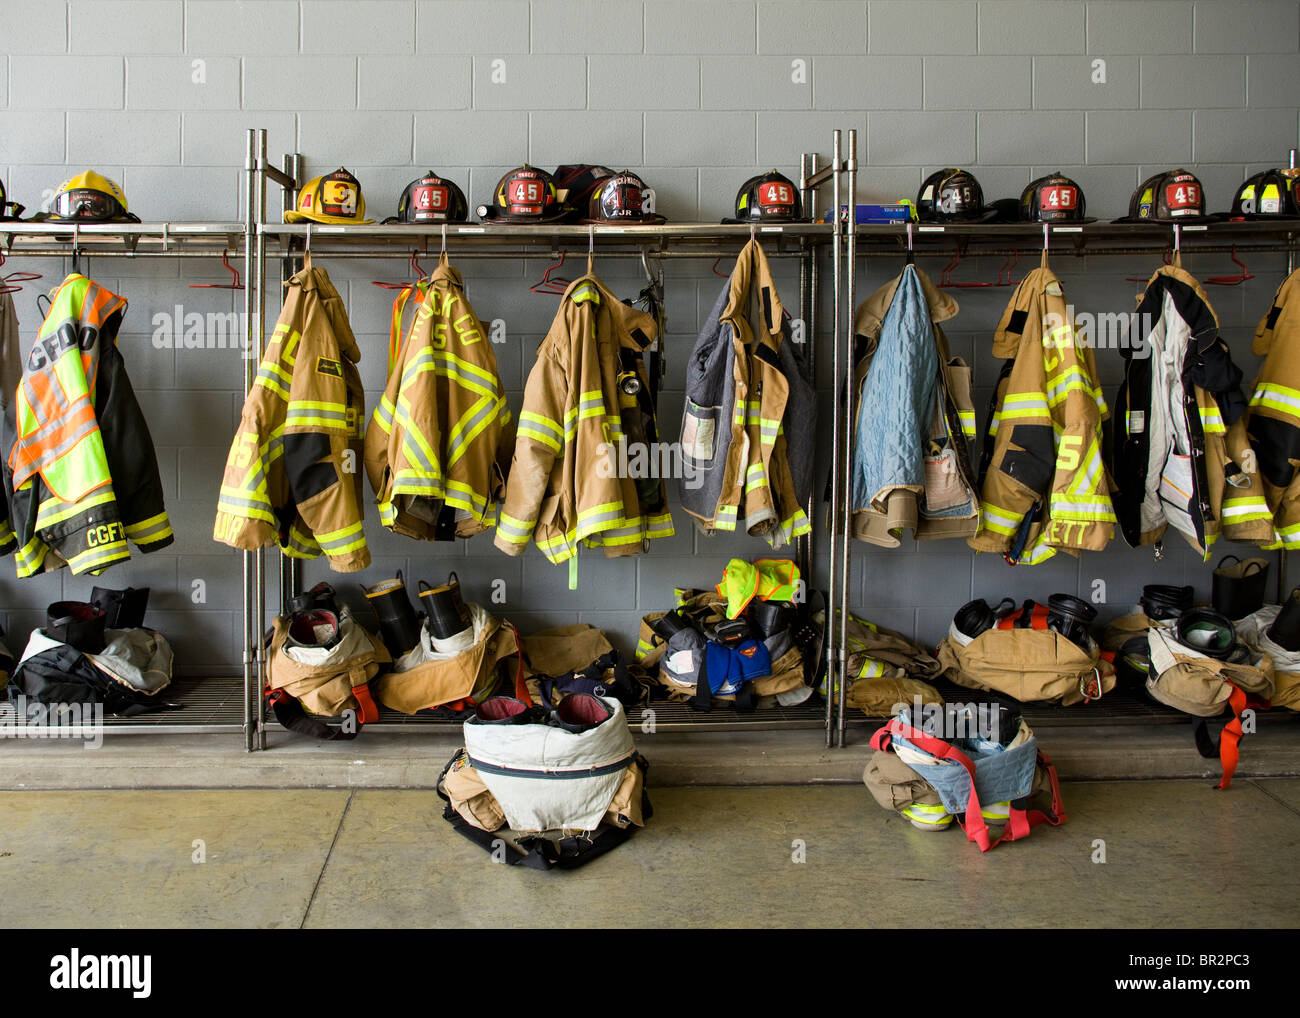 American firefighter helmets and turnout coats - Pennsylvania USA Stock Photo